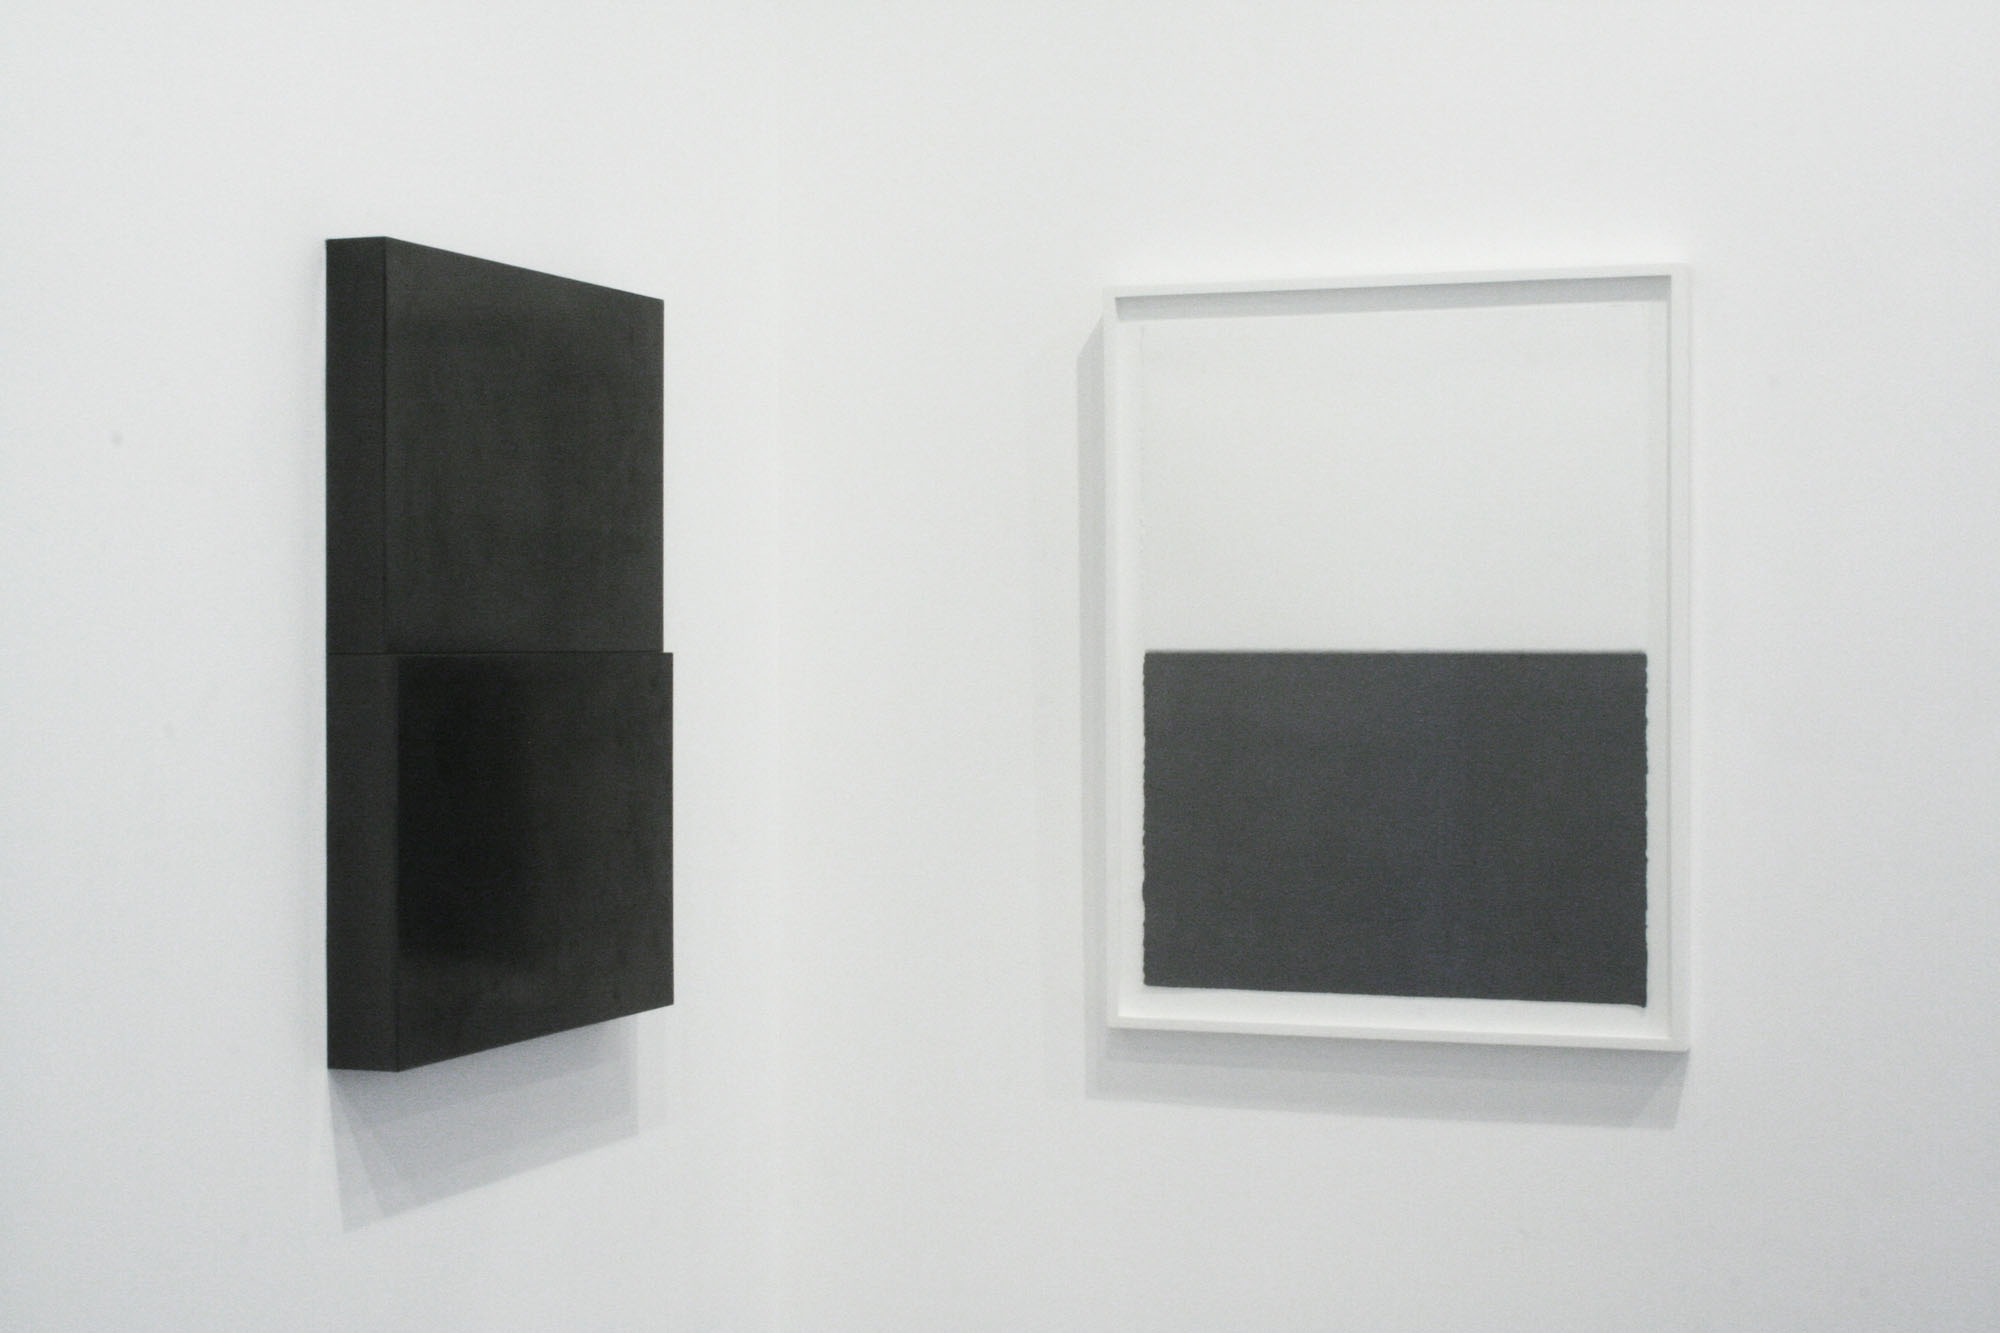   Diptych, no.1, 2010  Drawing: Graphite pencil on paper,&nbsp;30” x 22”  Sculpture: Solid Graphite,&nbsp;30" x 22"&nbsp;x 3" 